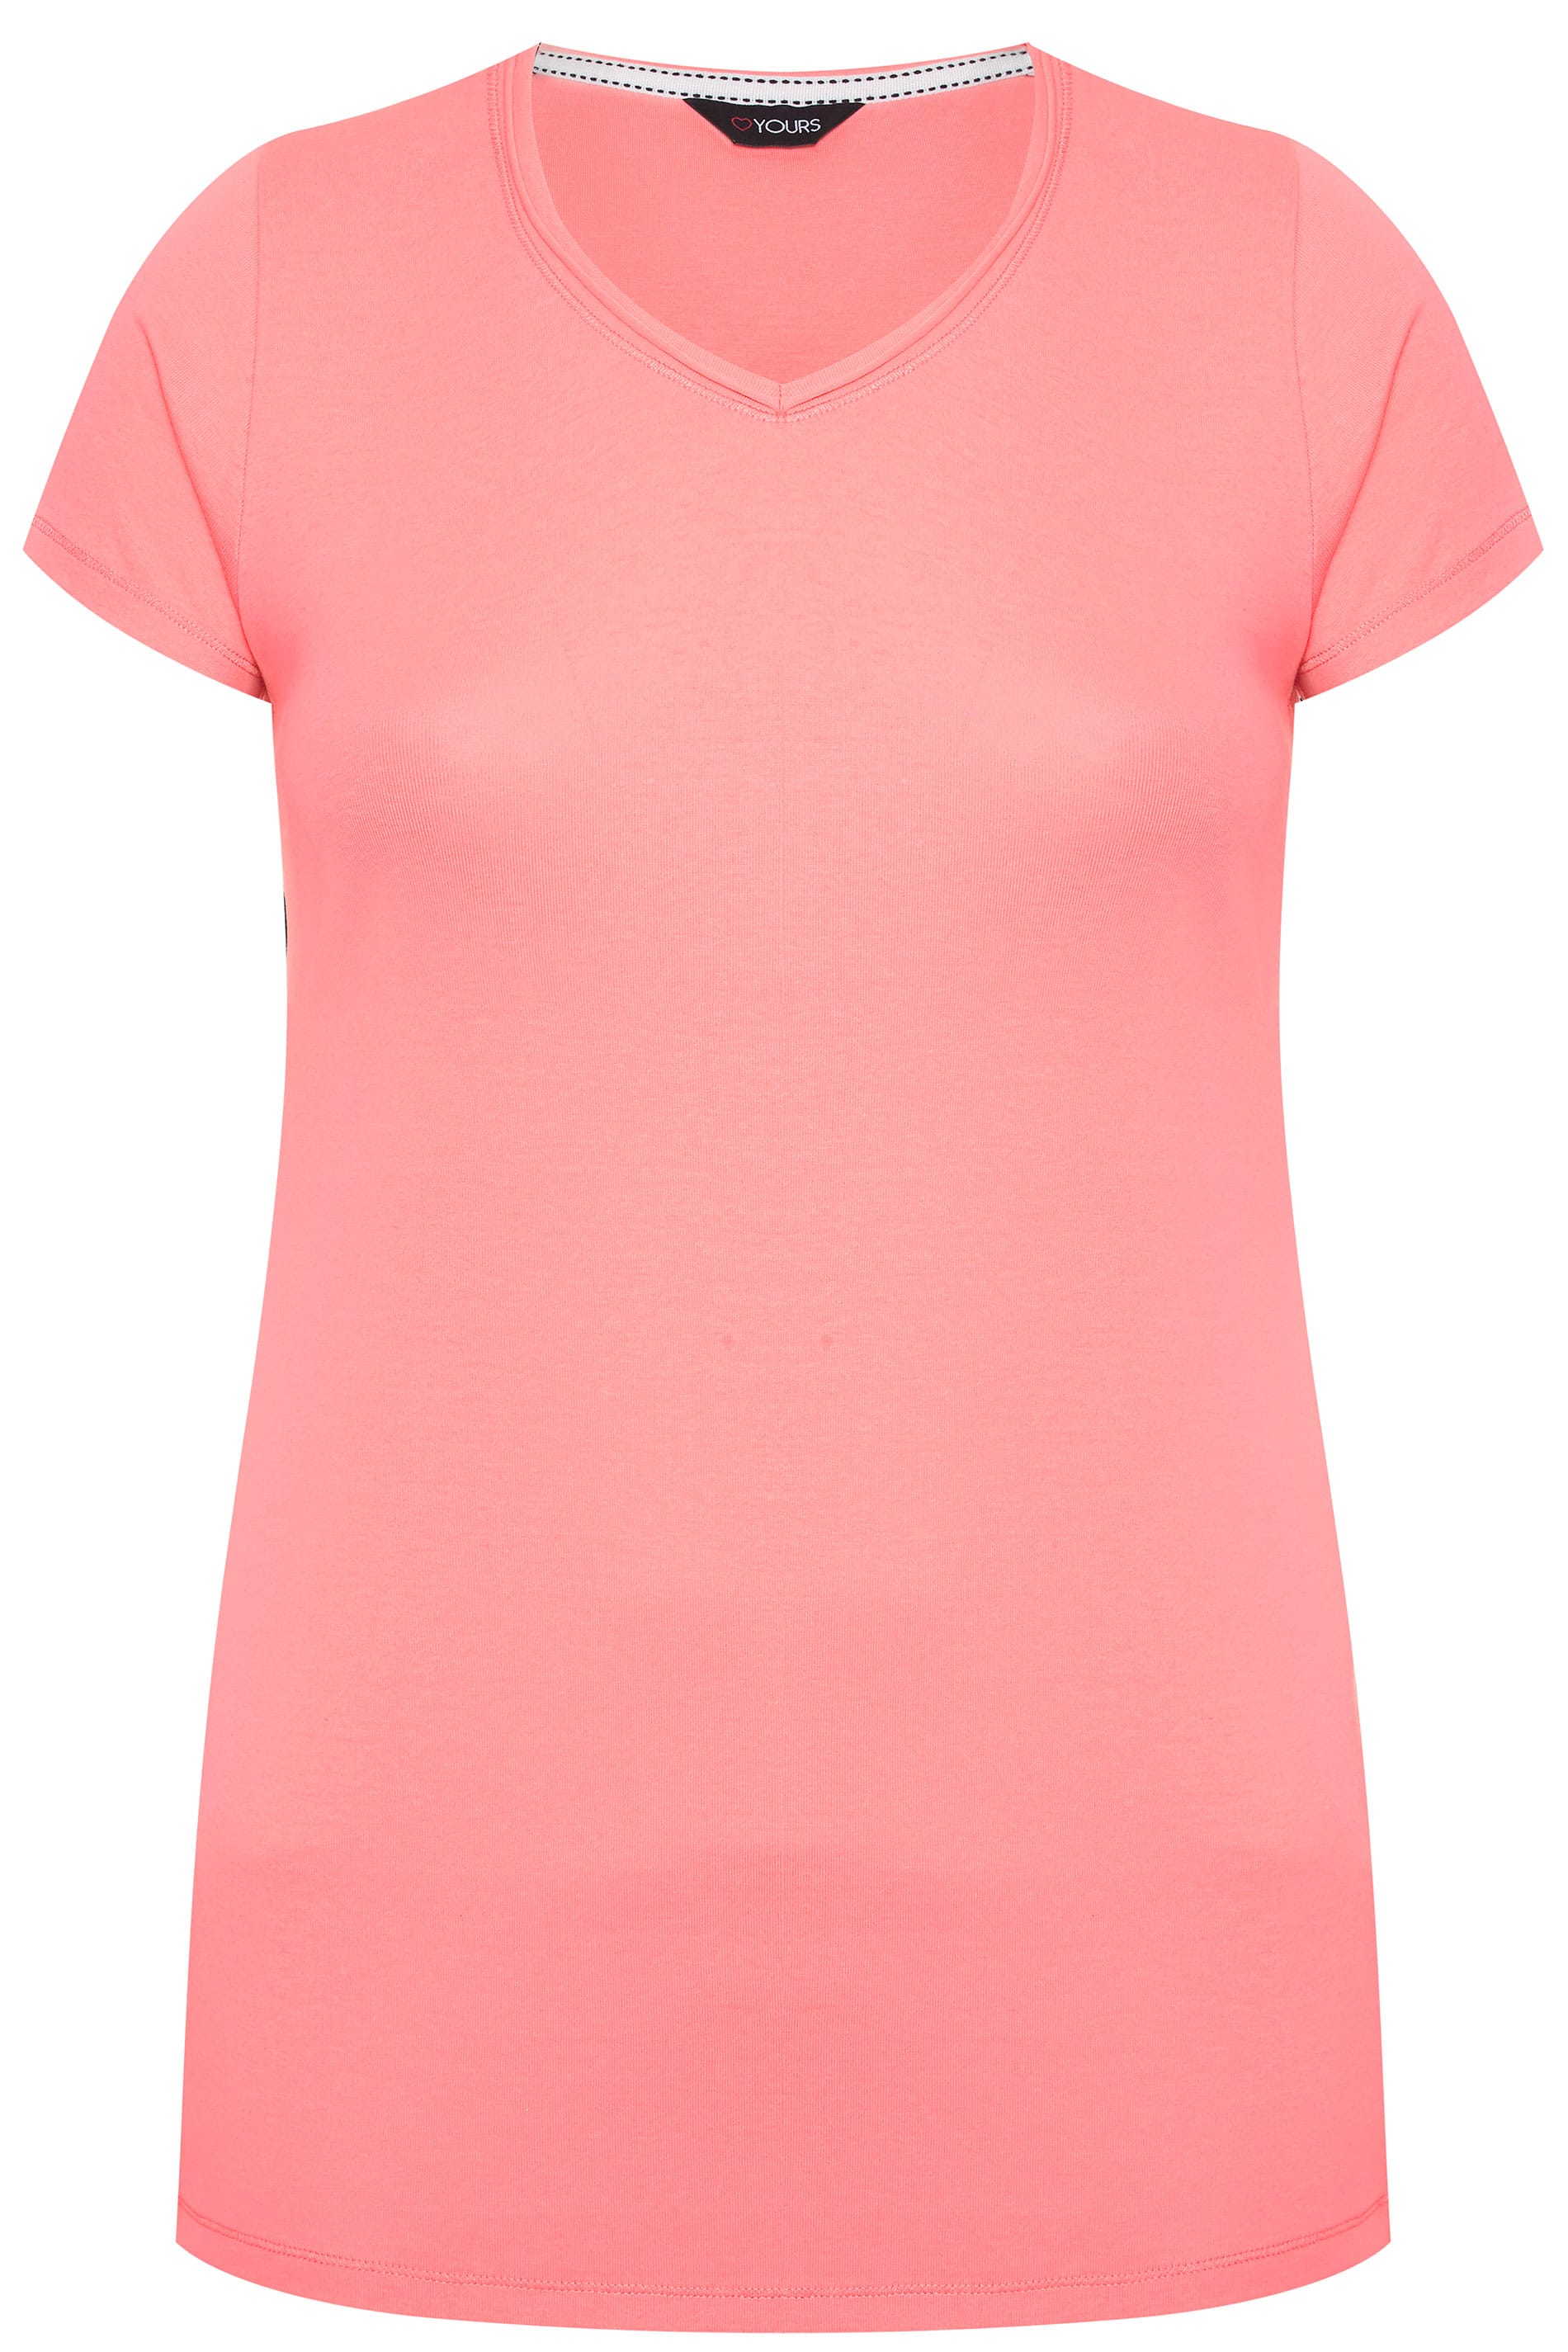 Coral Pink V-Neck Plain T-Shirt | Yours Clothing